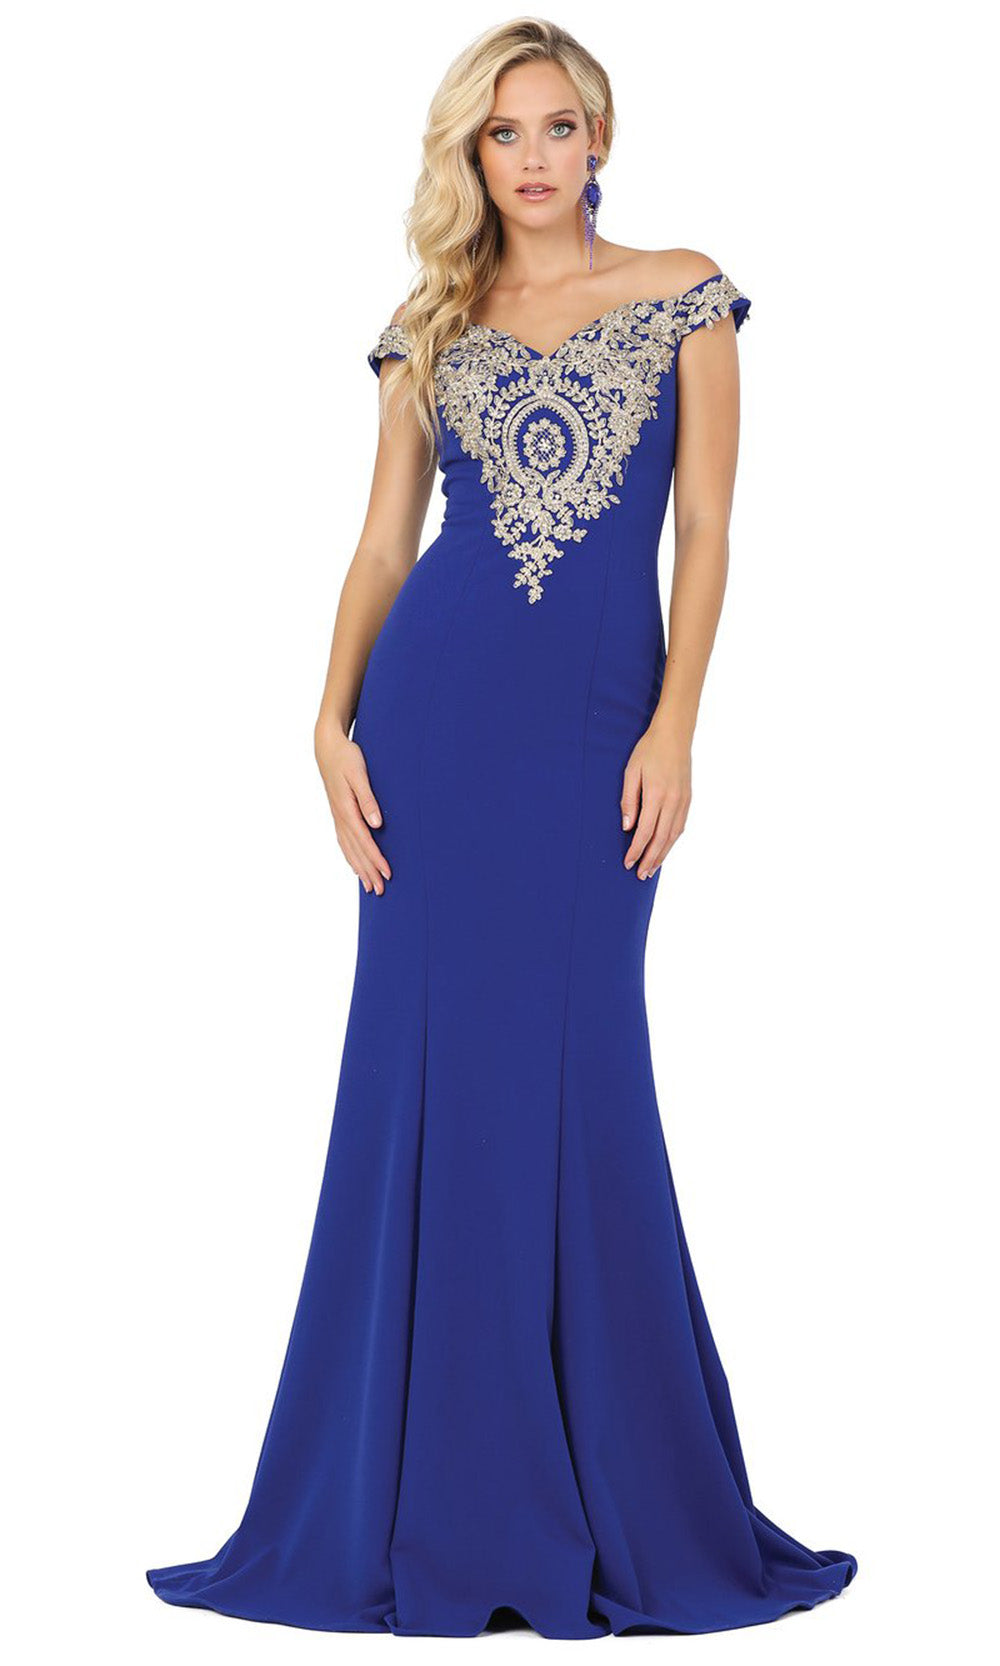 Dancing Queen - 2414 Off-Shoulder Gold Appliqued Fitted Gown In Blue